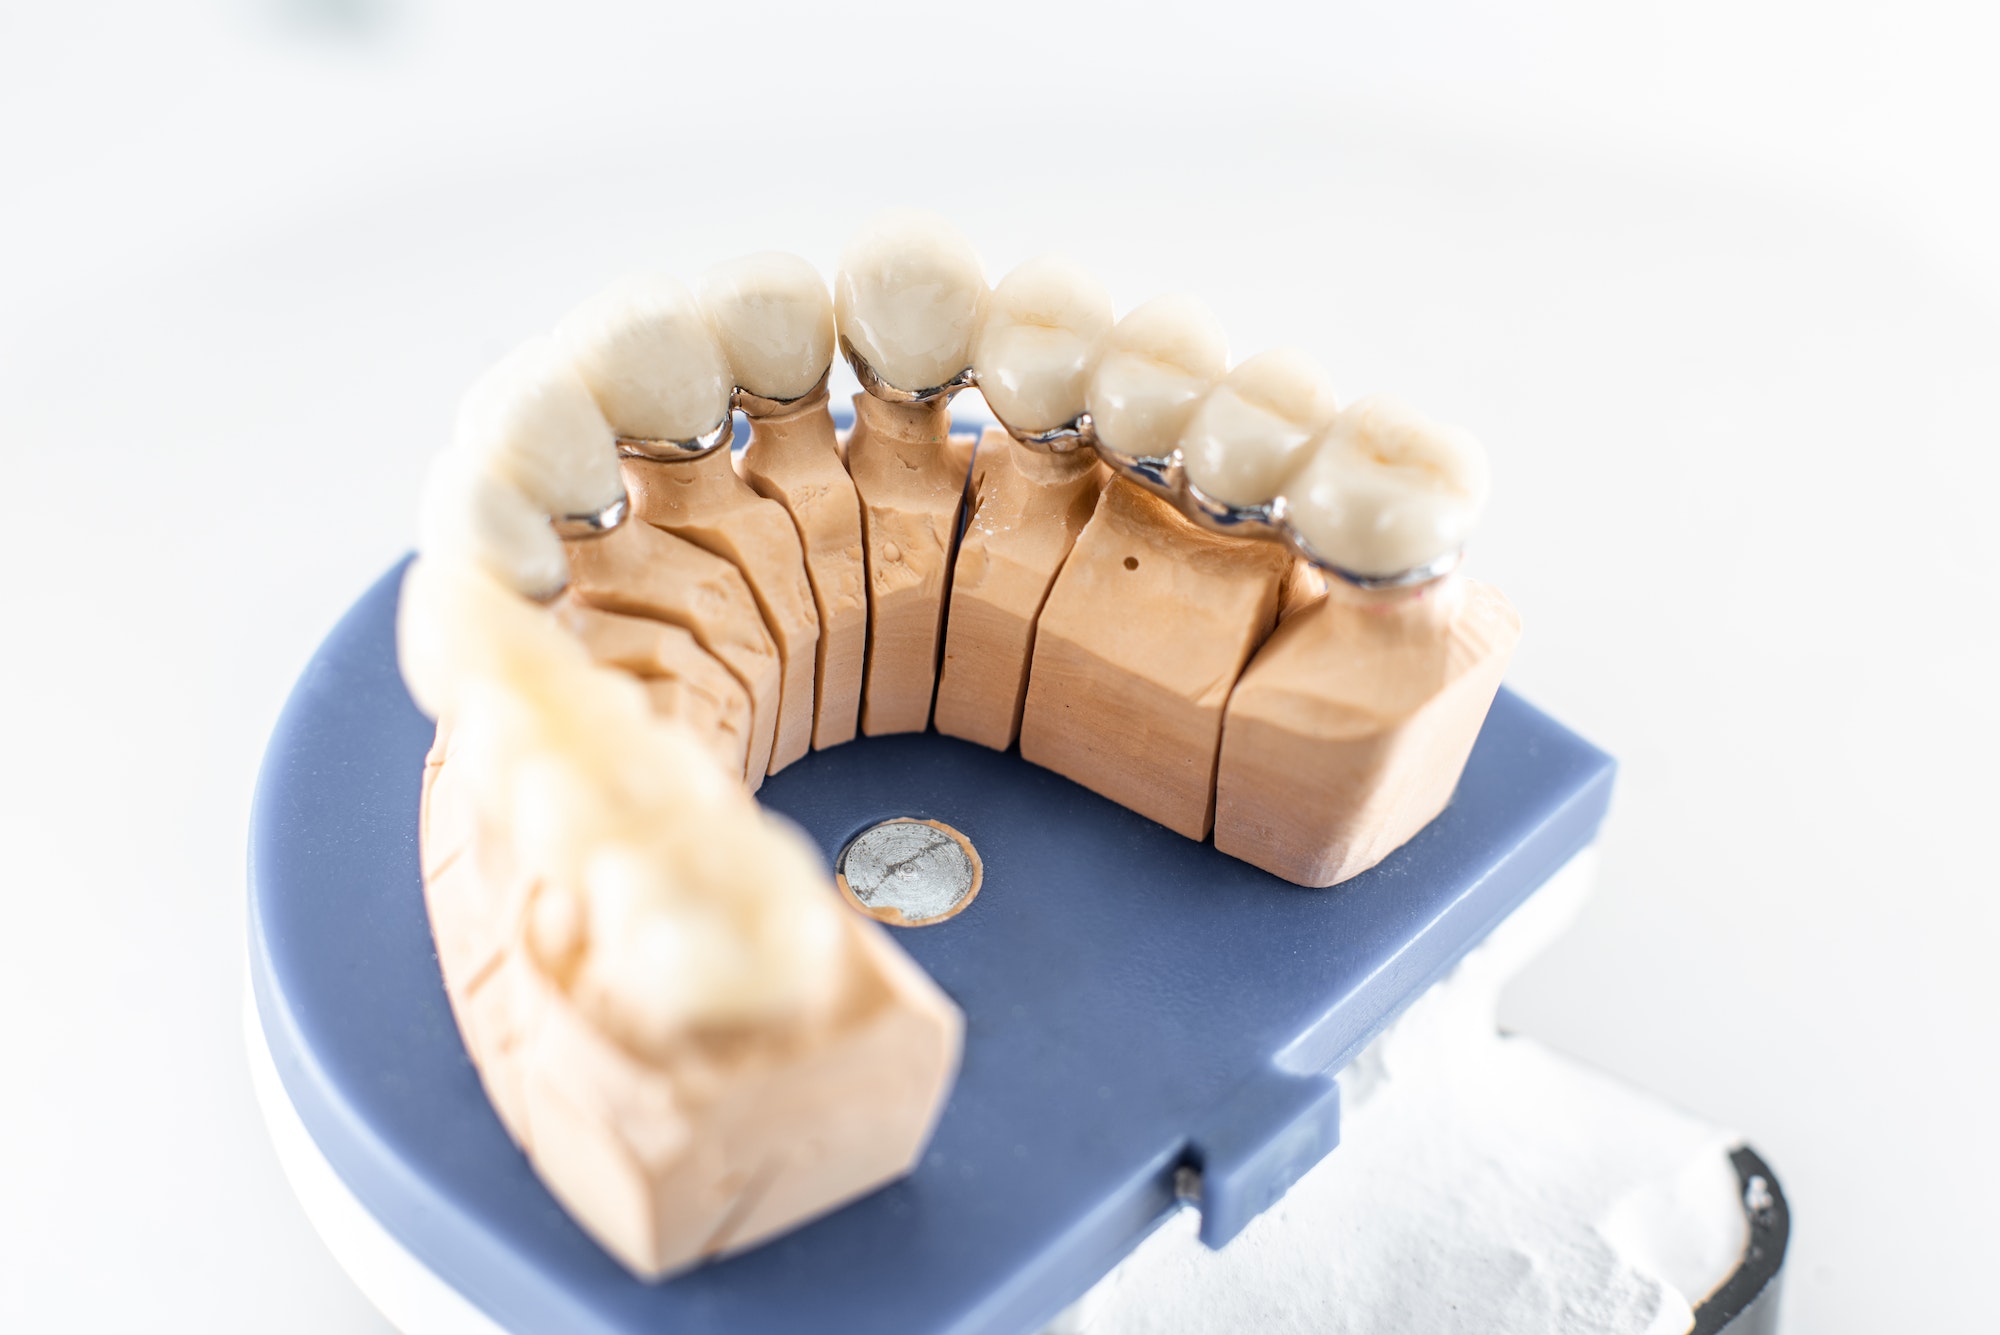 Dental imprint with artificial teeth